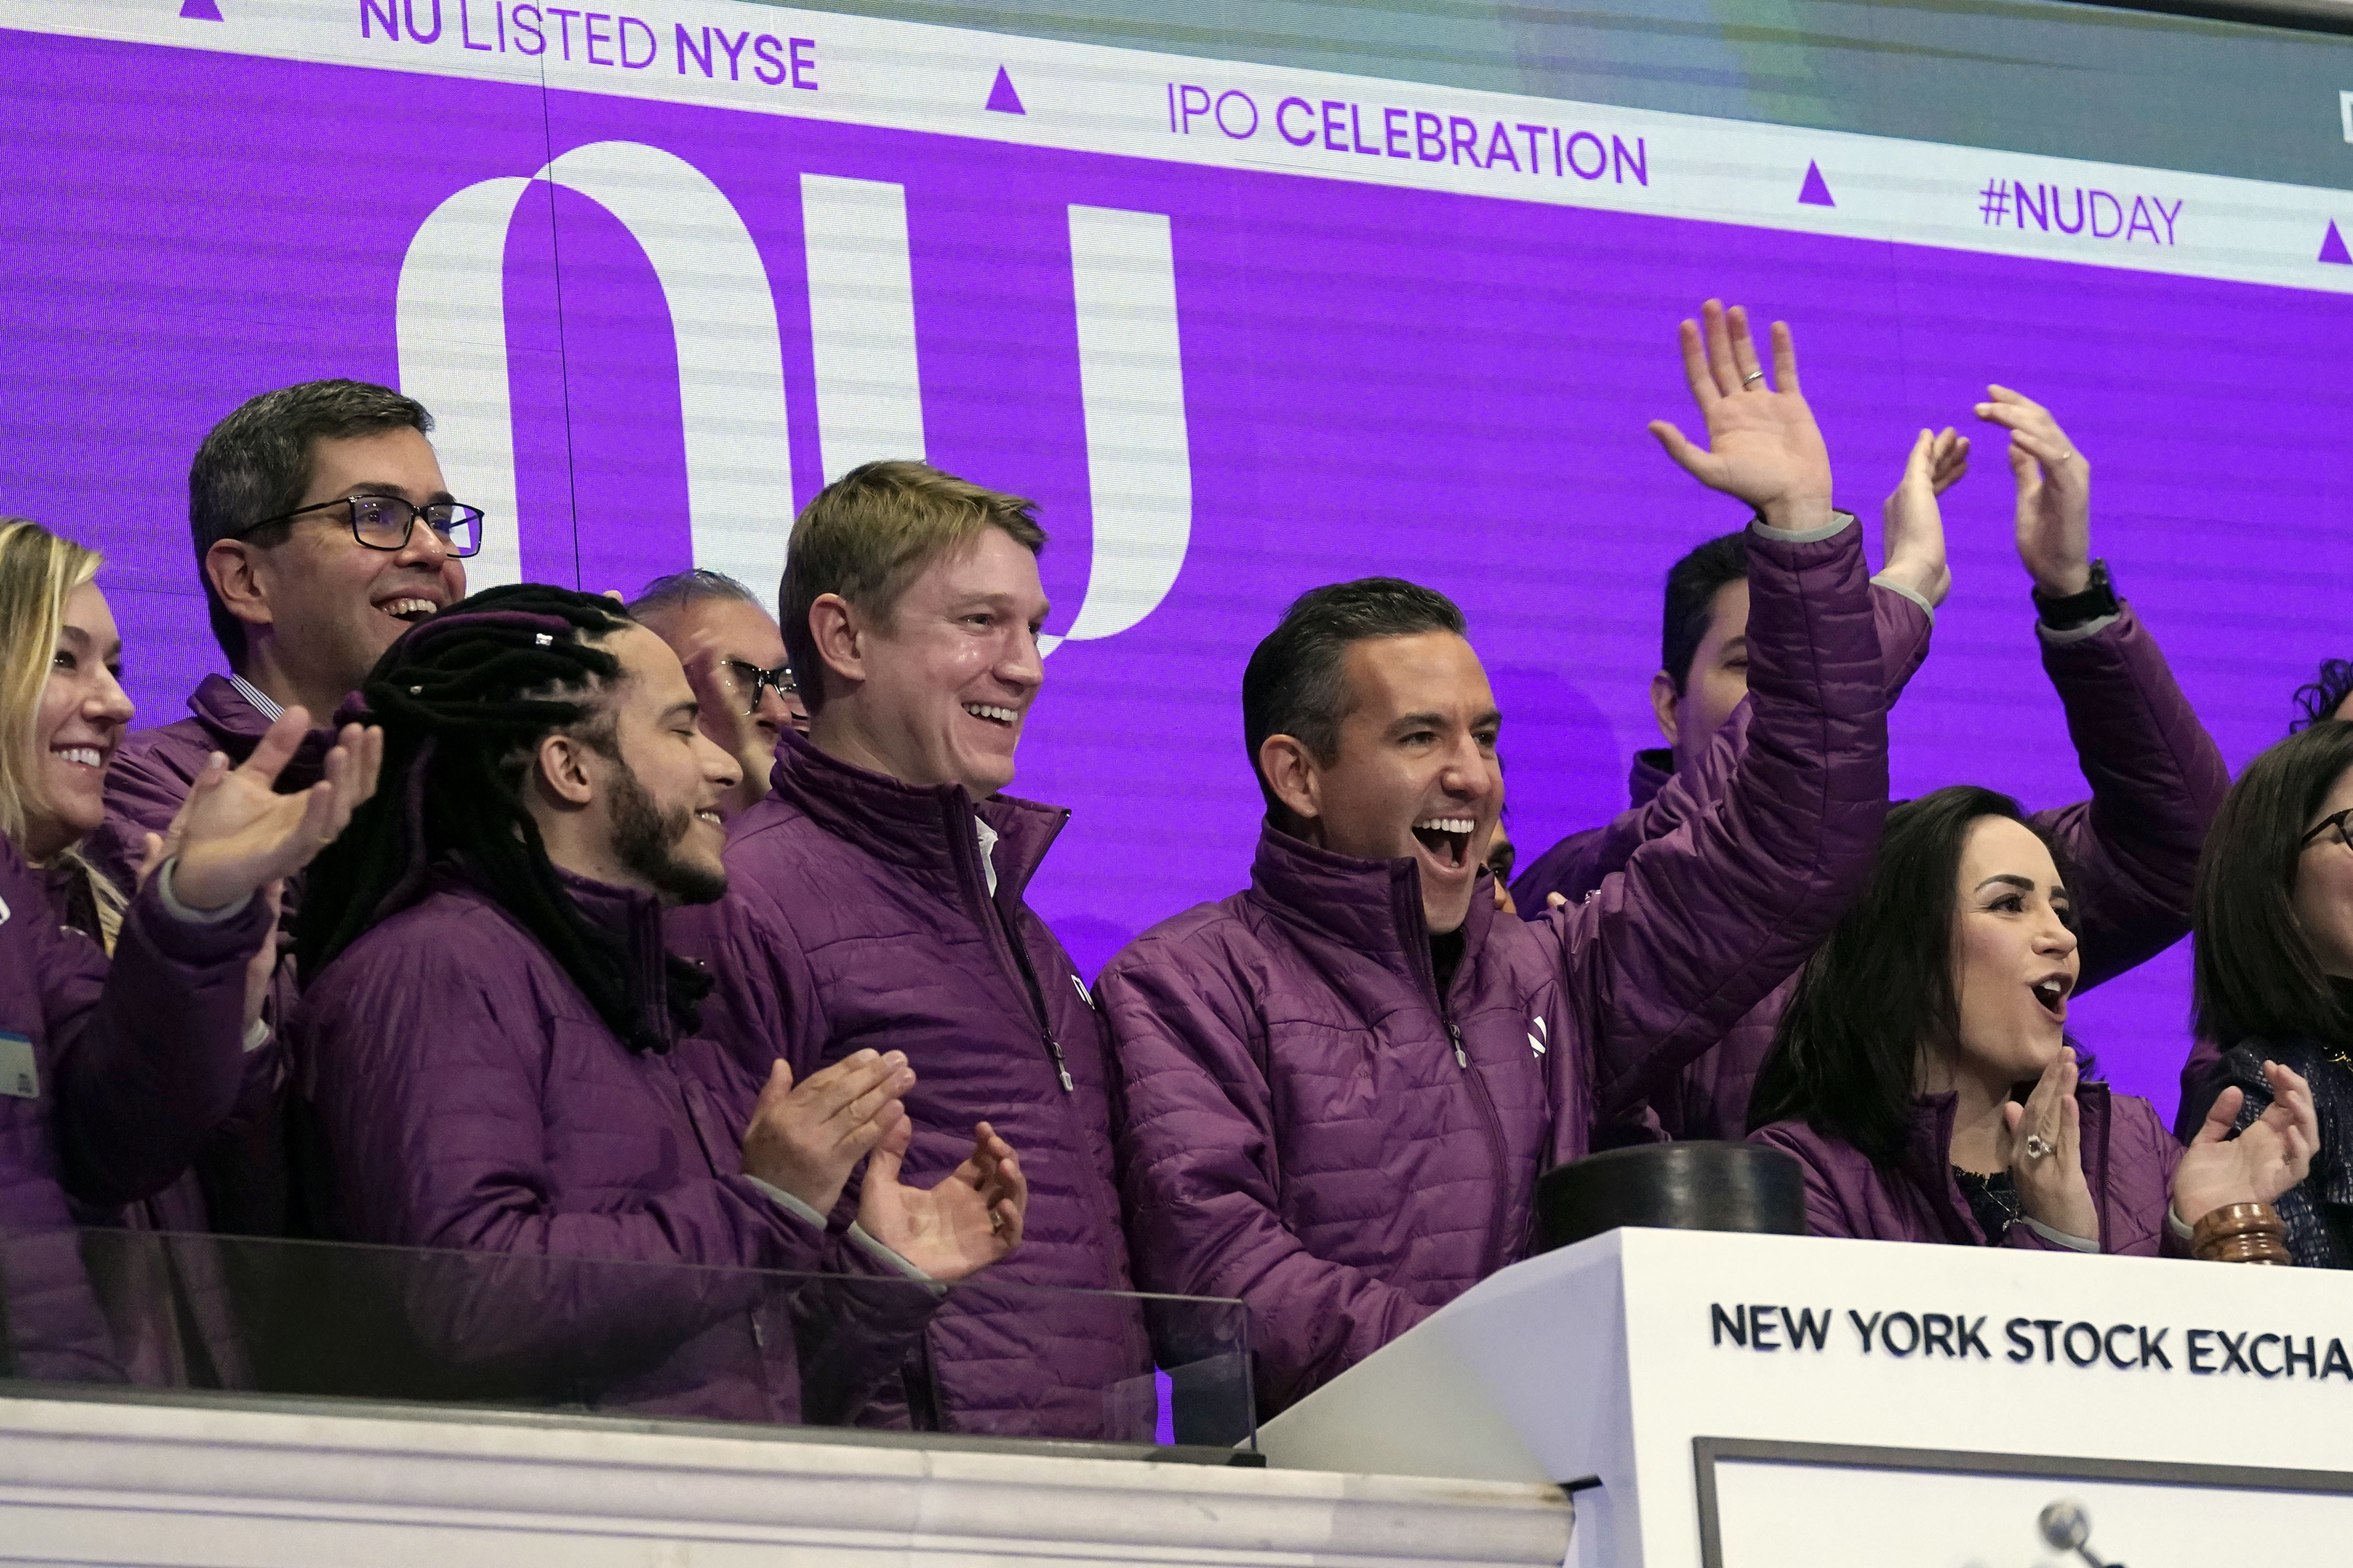 Nubank CEO David Velez, second from right, is flanked by co-Founders Edward Wible, third from right, and Cristina Junqueira, right, as he rings the New York Stock Exchange opening bell, before their company's IPO, Thursday, Dec. 9, 2021. (AP Photo/Richard Drew)